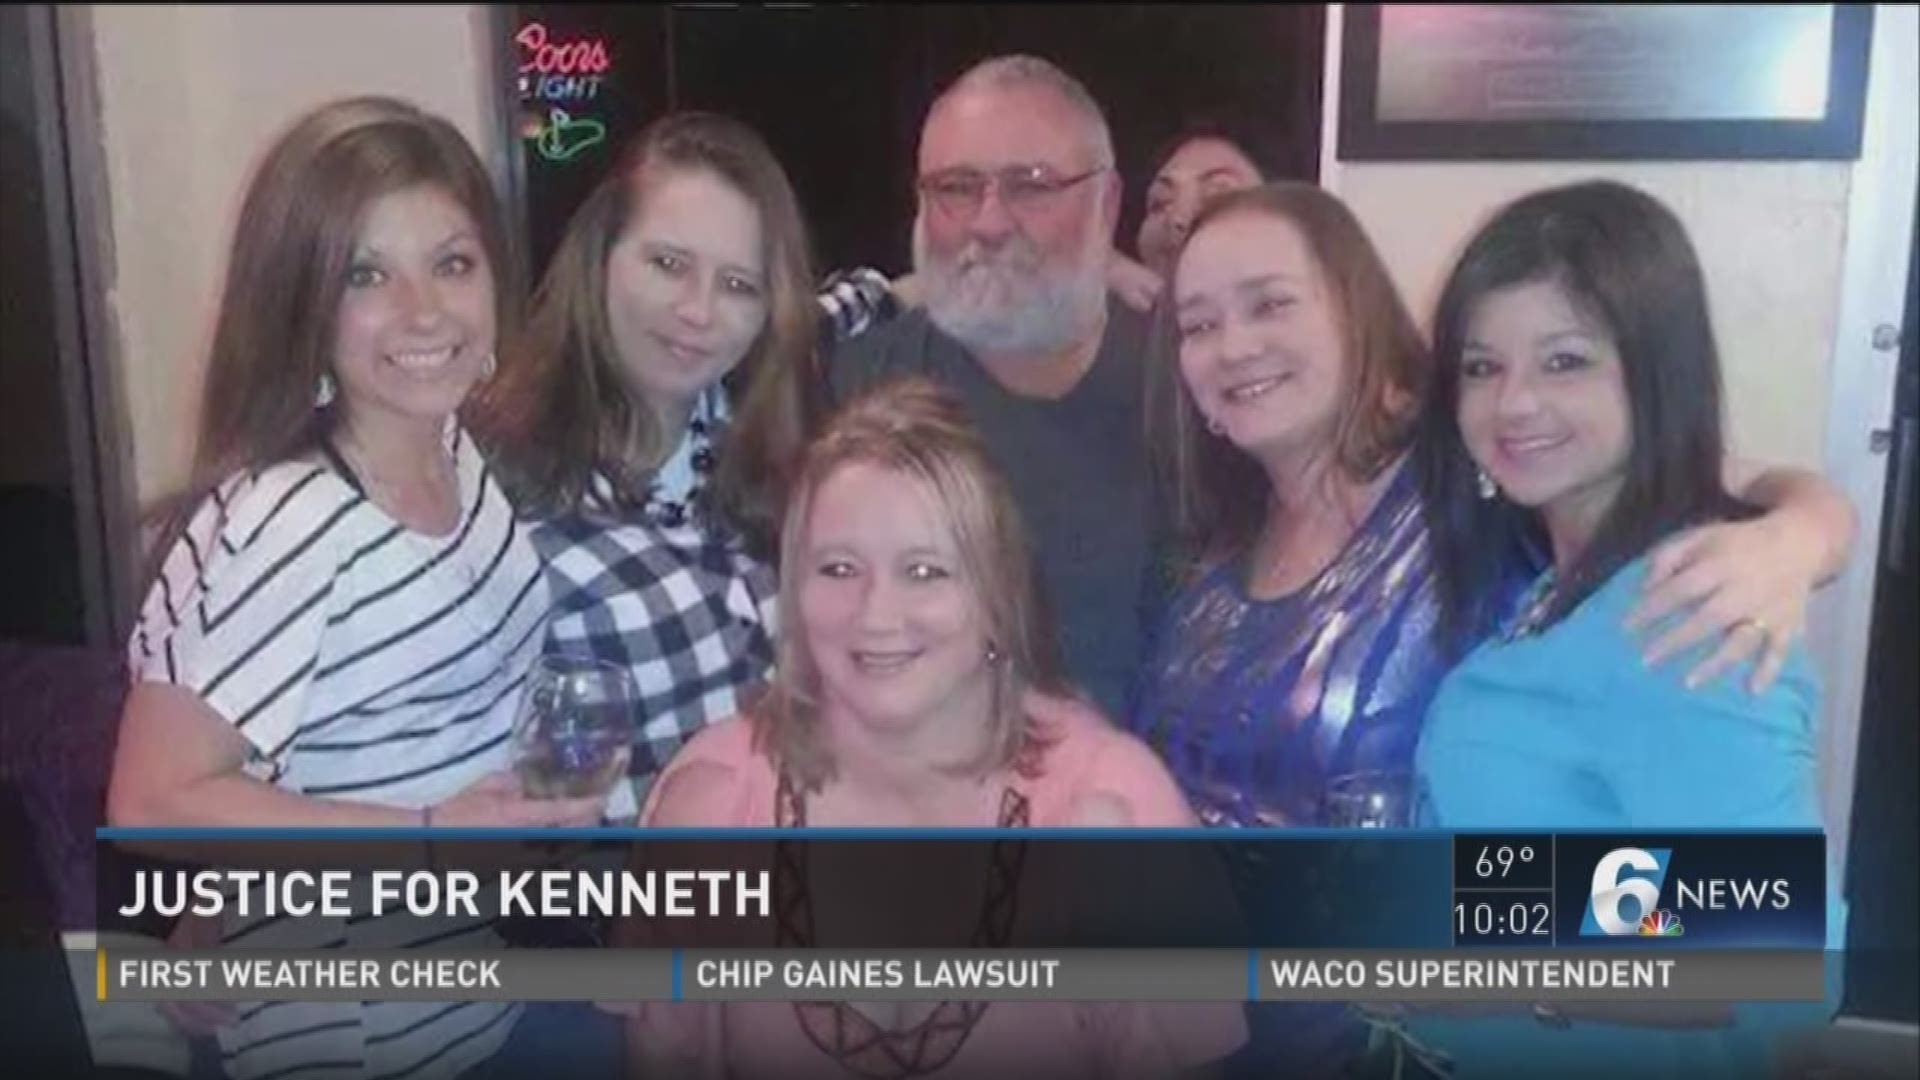 Nearly a year after Kenneth Cleveland's brutal murder in Waco, his daughters still don't know who killed him.